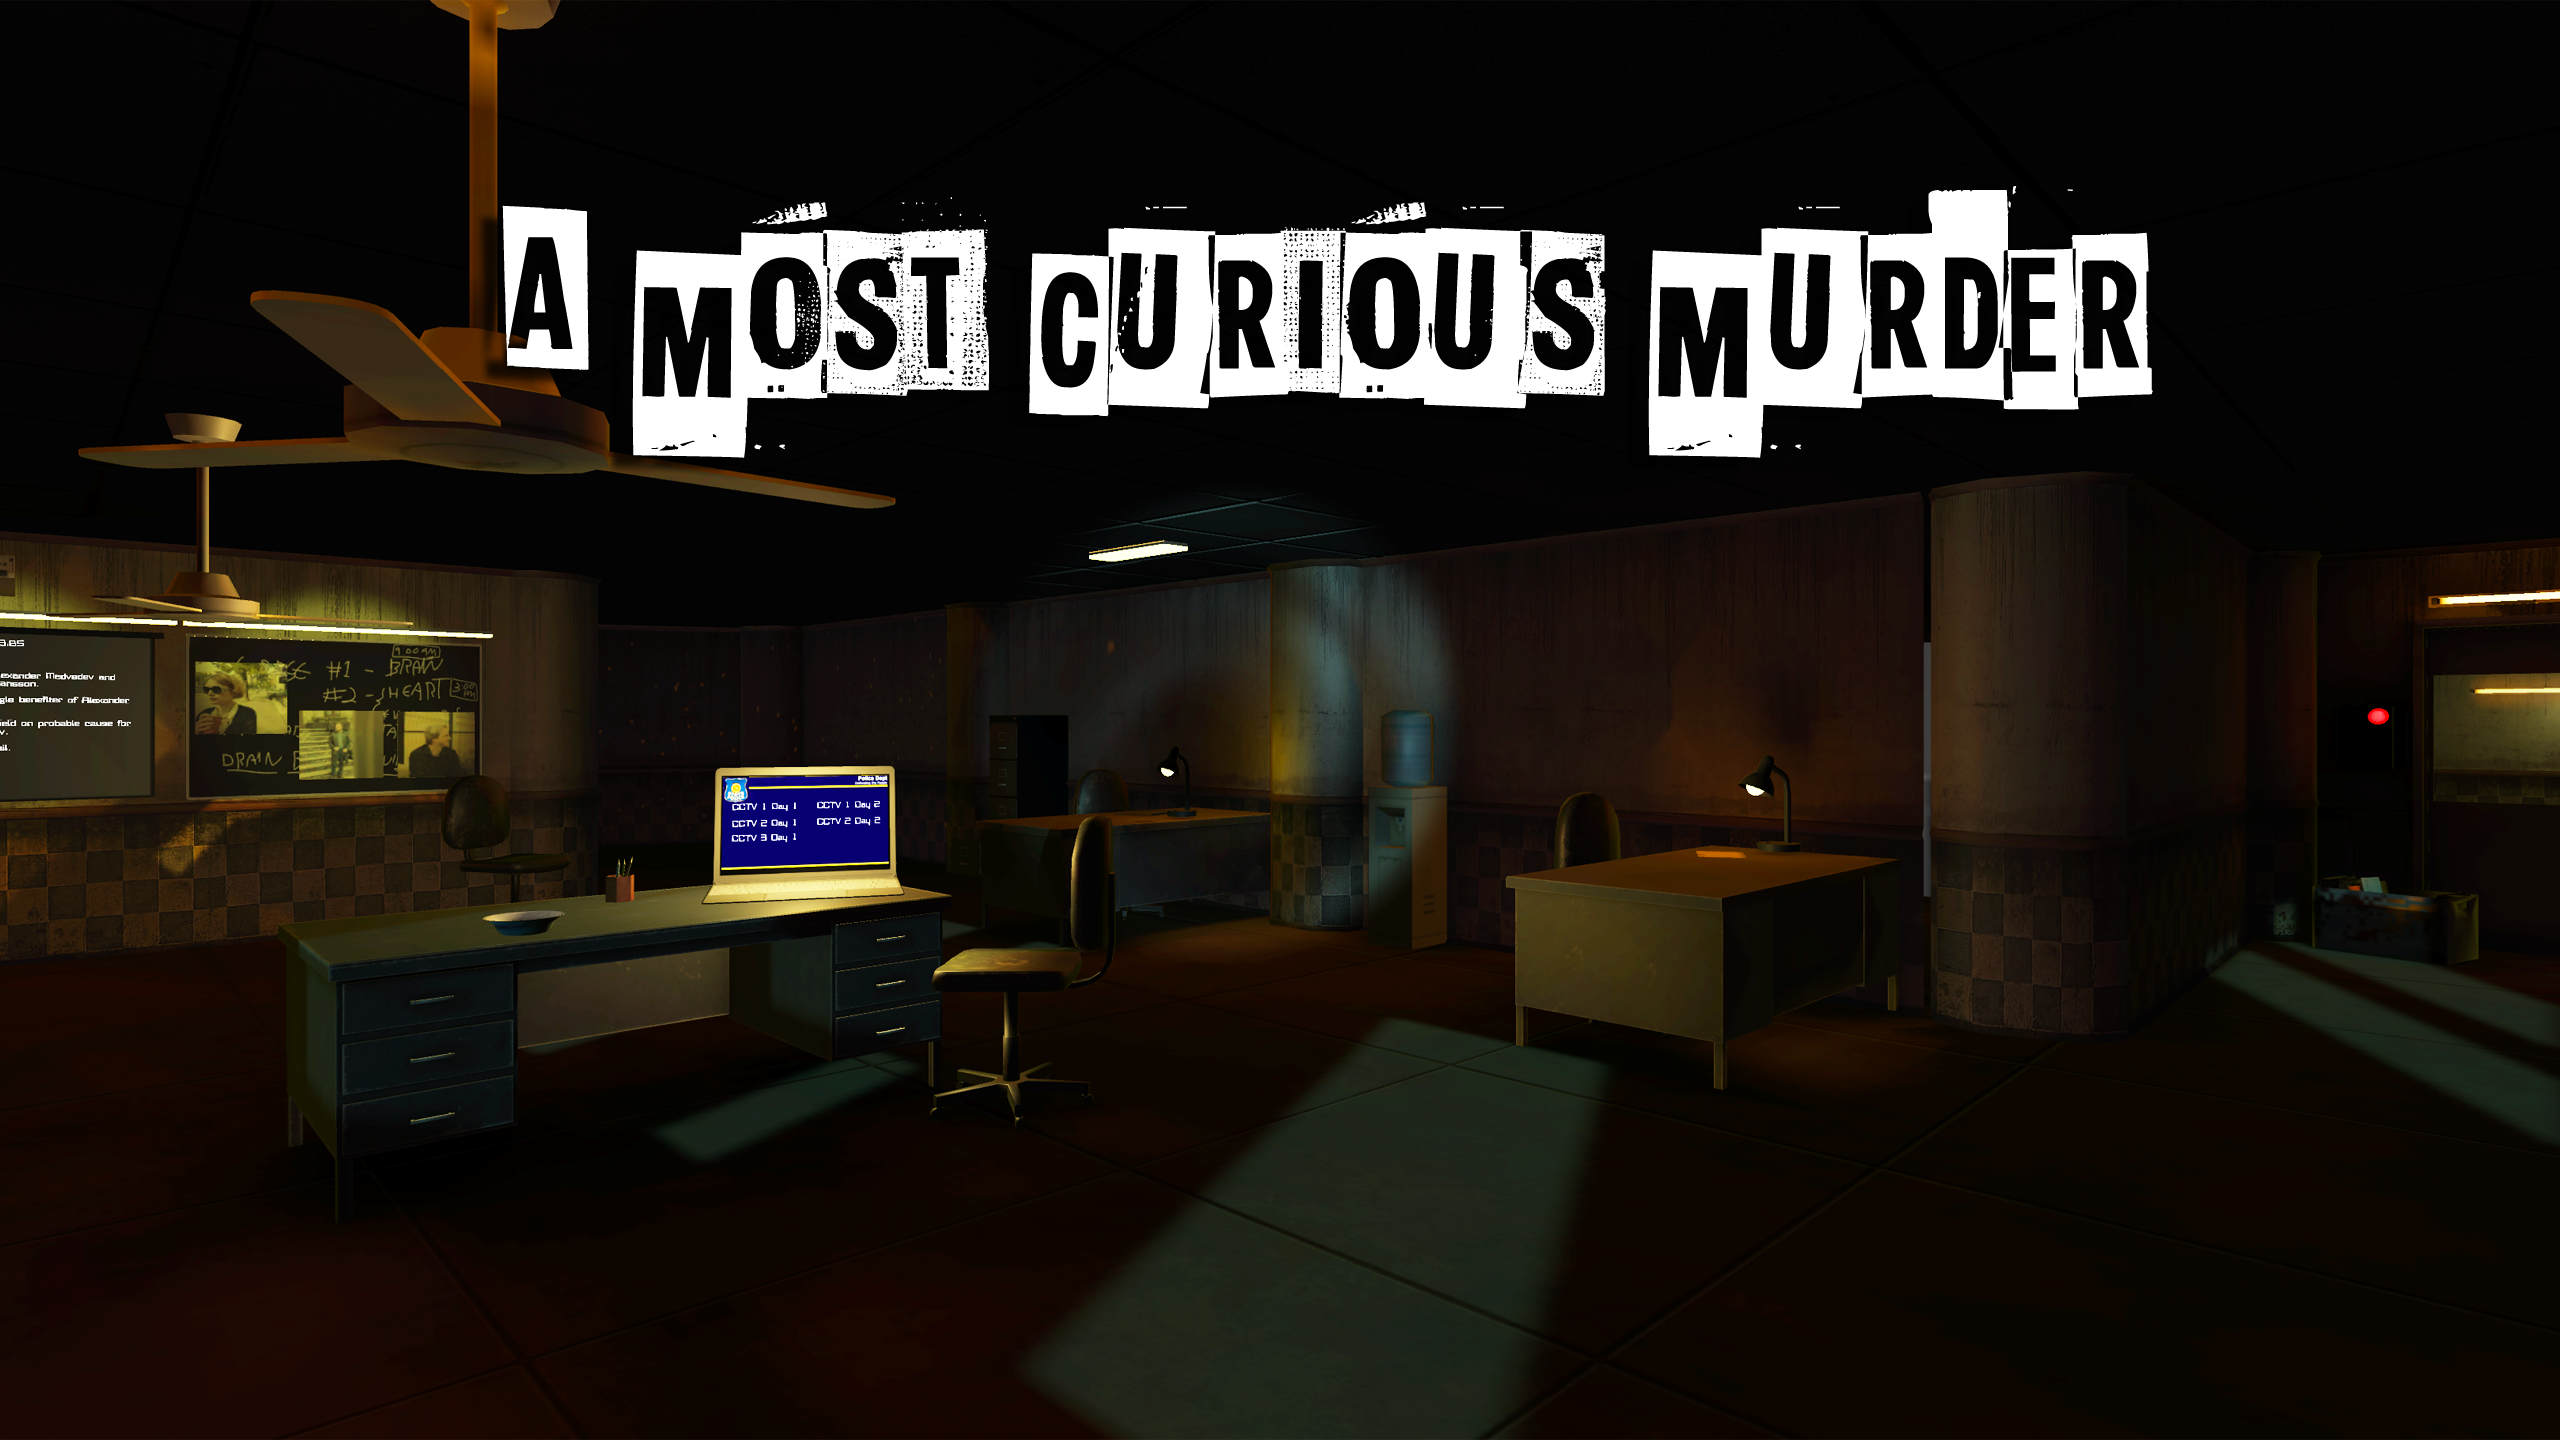 PGConnects: A Most Curious Murder is an immersive VR murder mystery for Gear VR